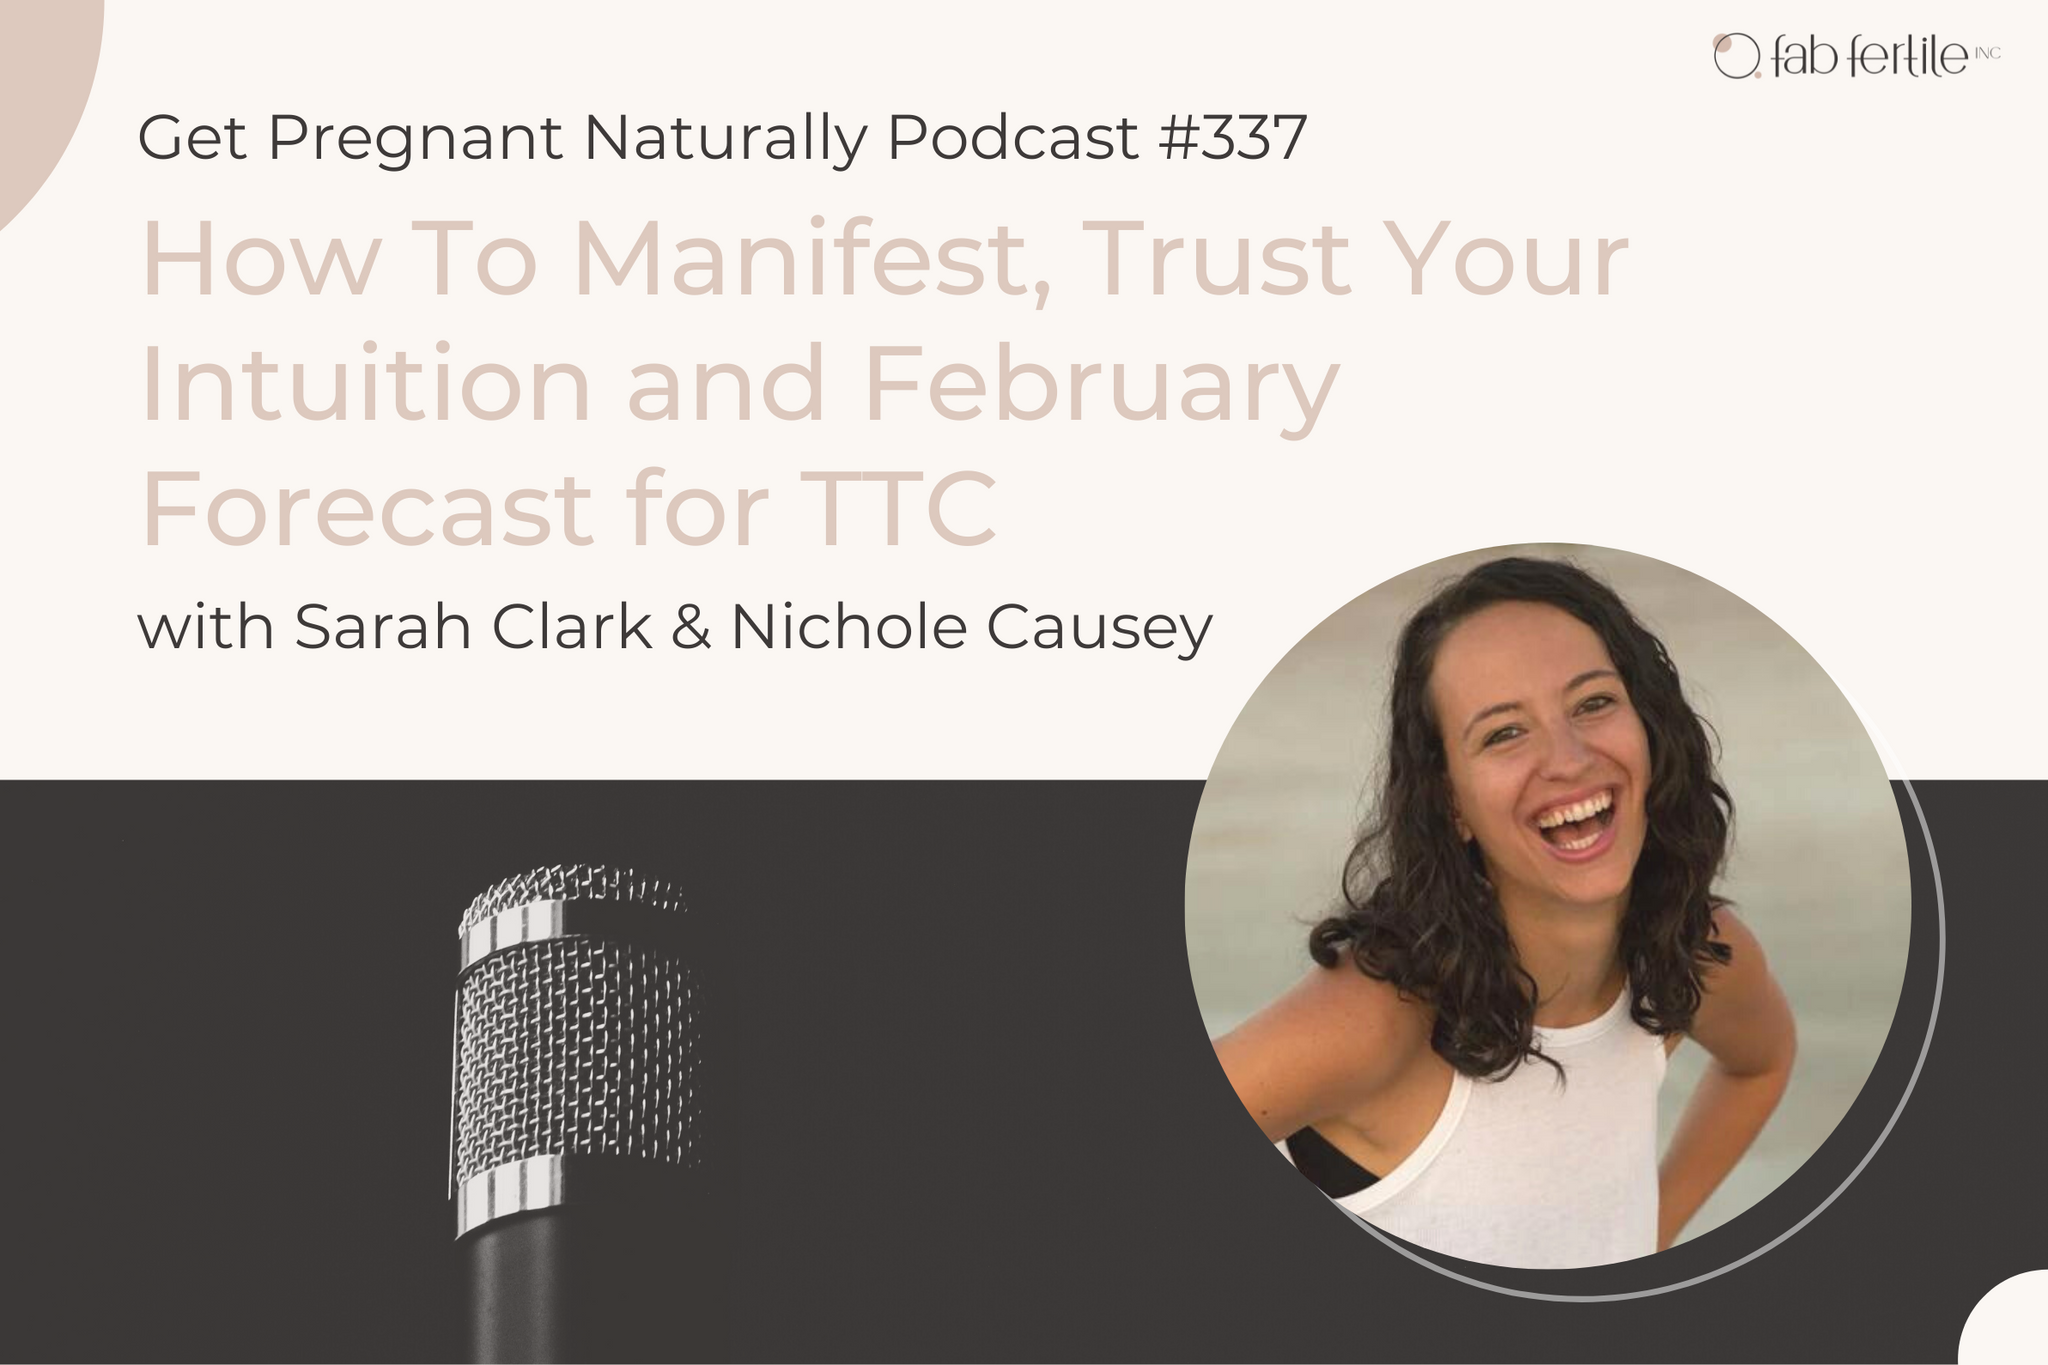 How To Manifest, Trust Your Intuition and February Forecast for TTC